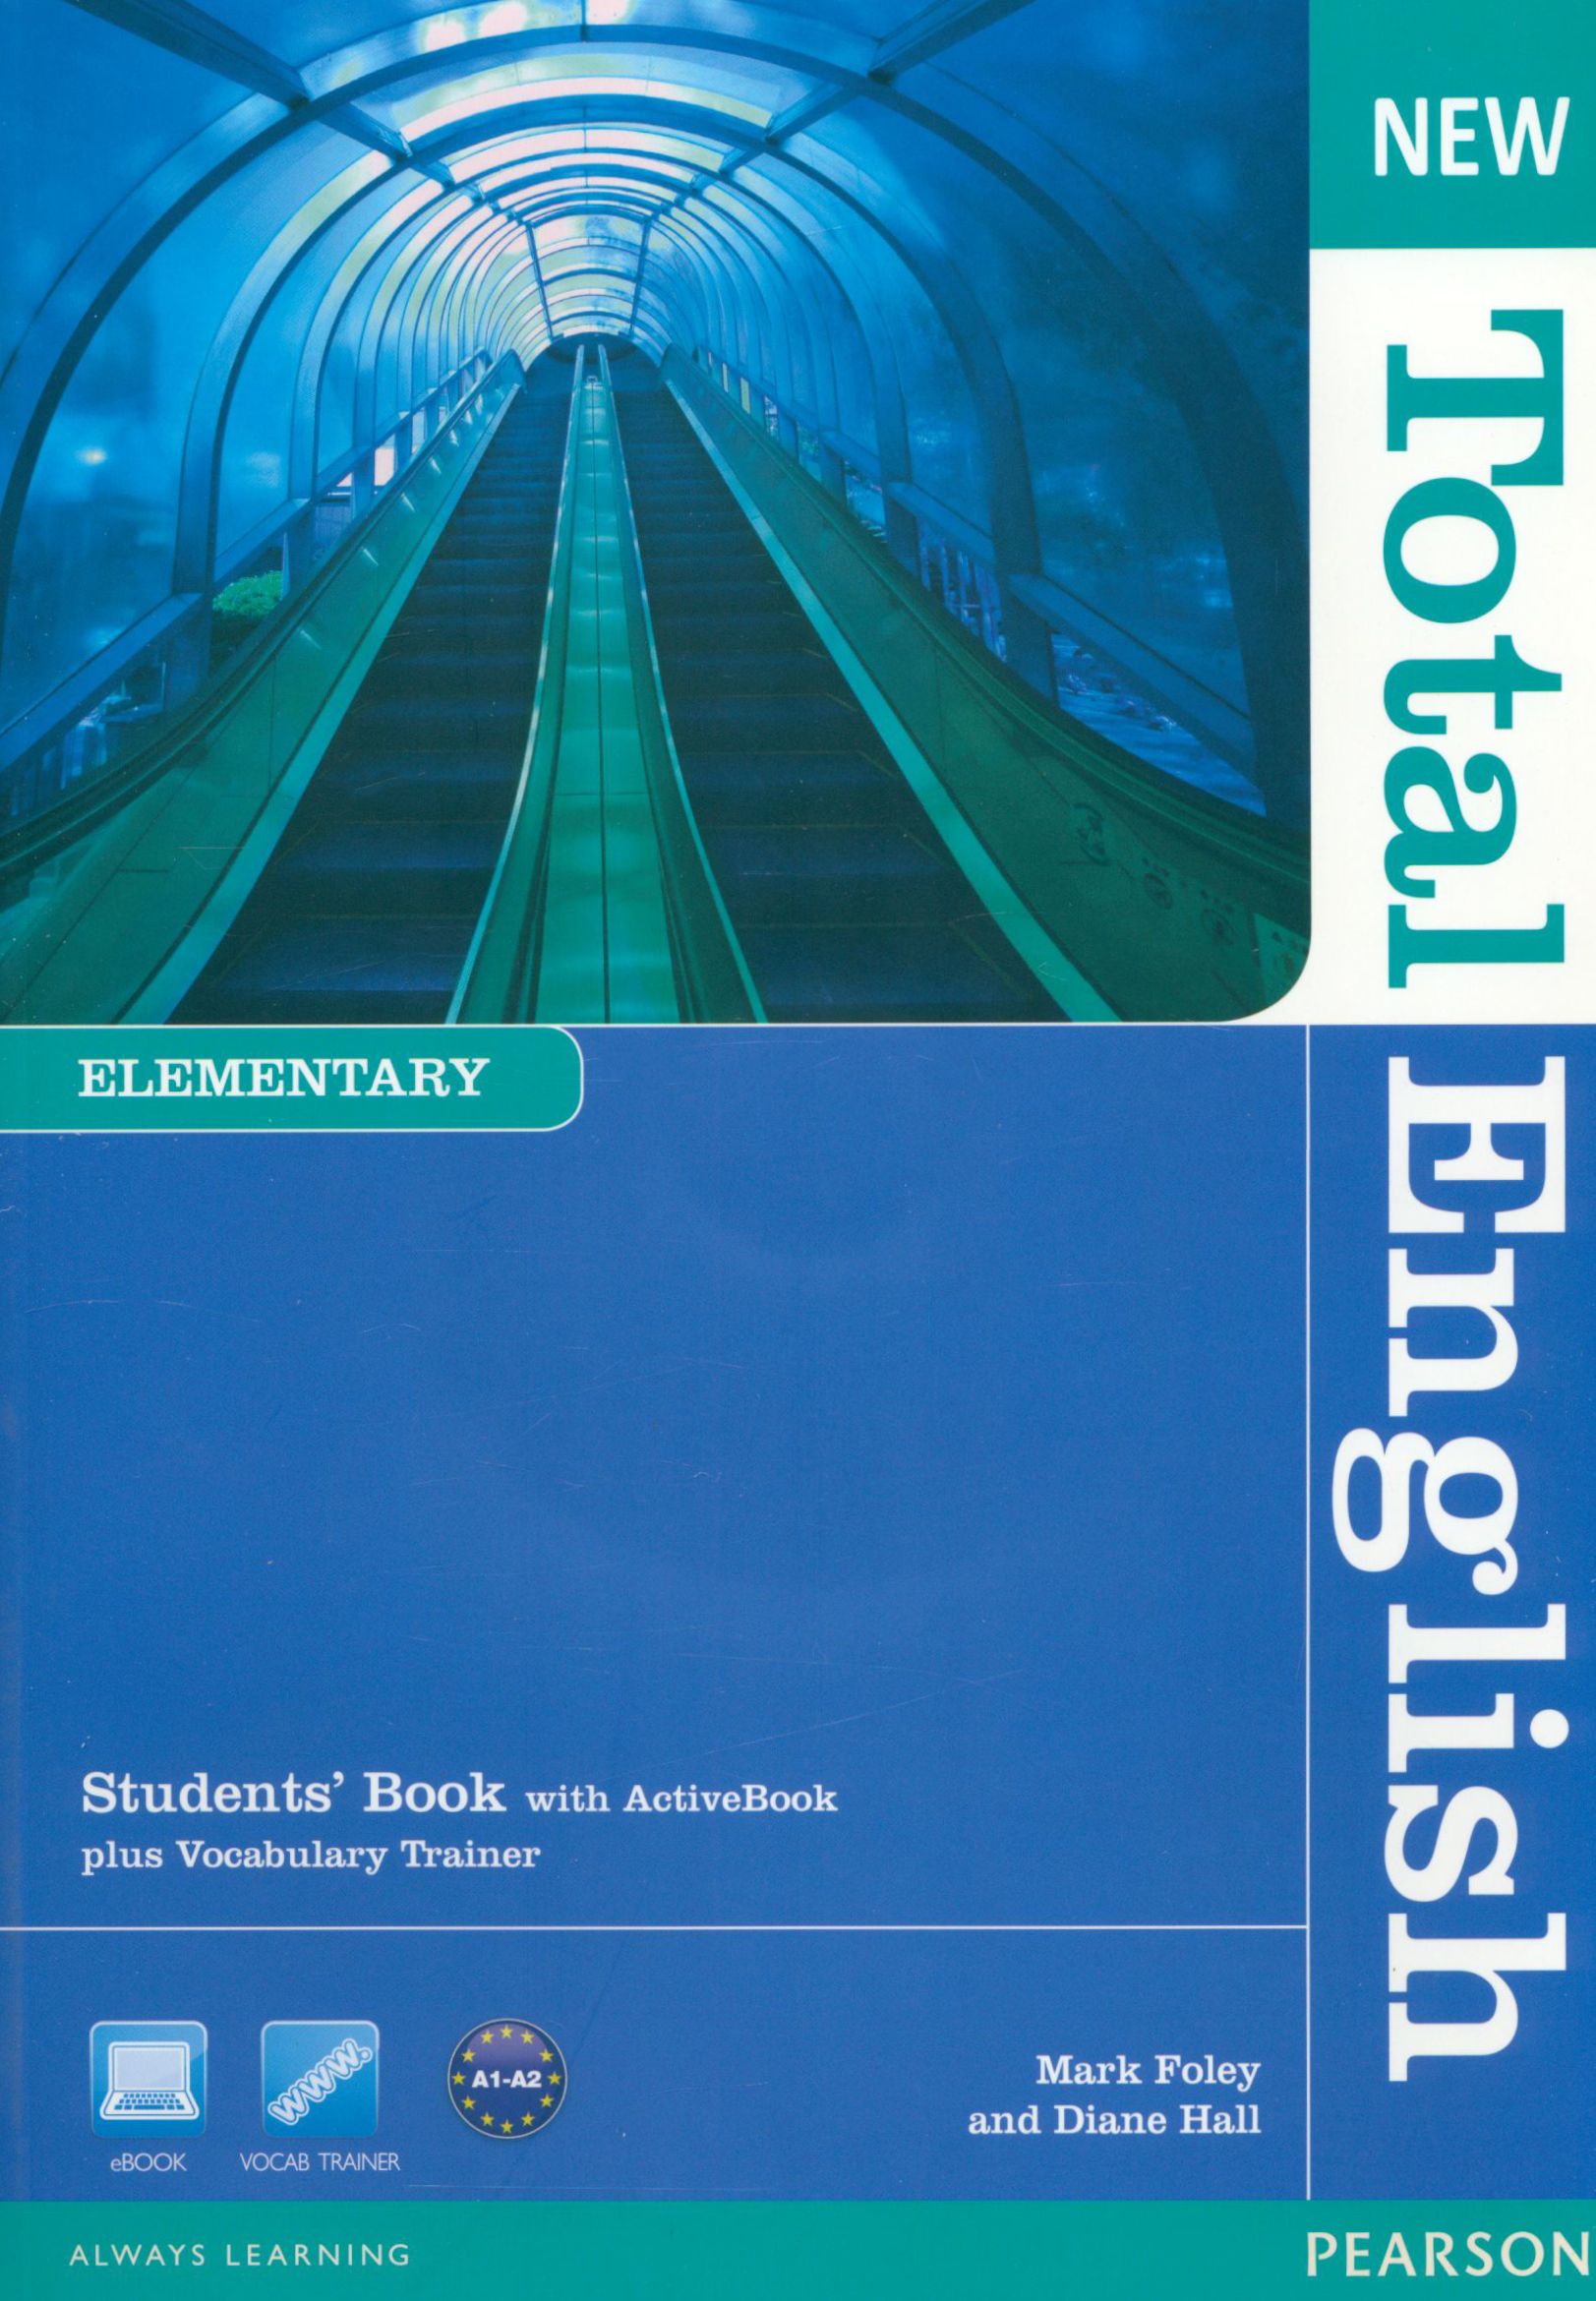 New total english workbook. New total English элементари. New total English учебник. Учебник total English students book. Учебник total English Elementary.